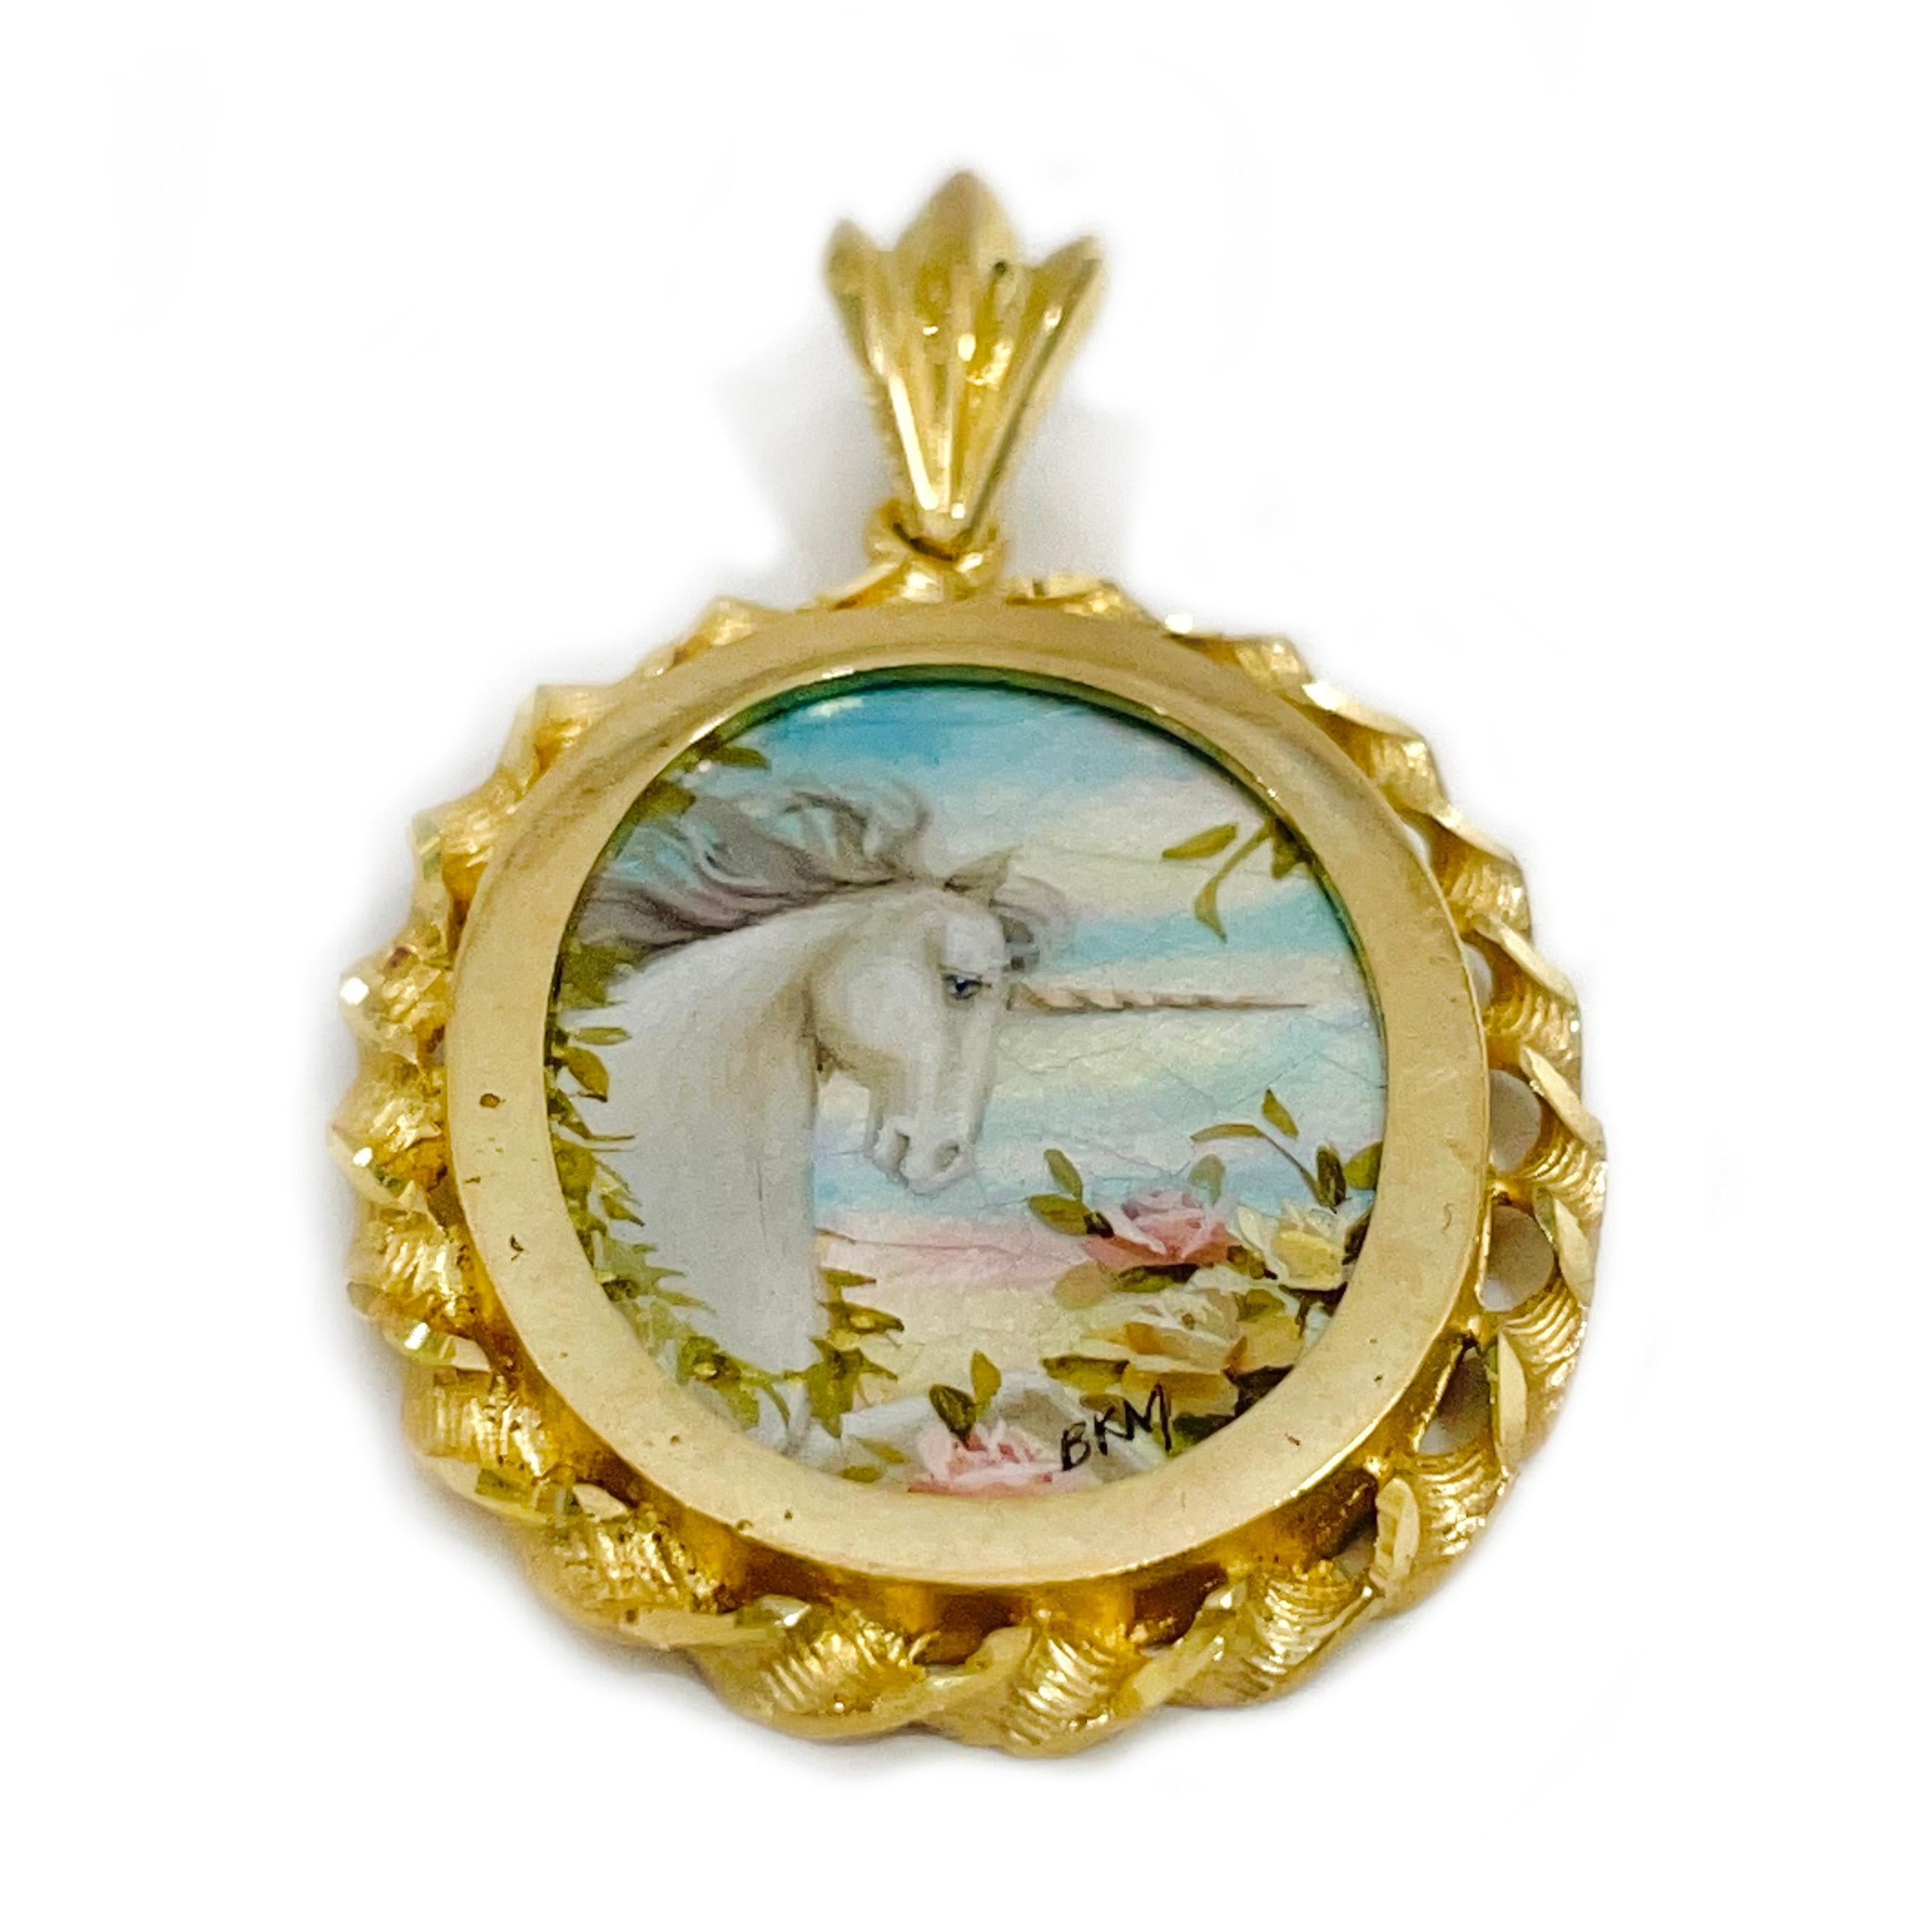 14 Karat Yellow Gold Forest Unicorn Hand Painted on a Mother of Pearl Pendant. The miniature painting is set in a 14 karat gold twisted rope oval frame with diamond-cut details. The painting is signed by the master artist, BKM Brian M. and includes